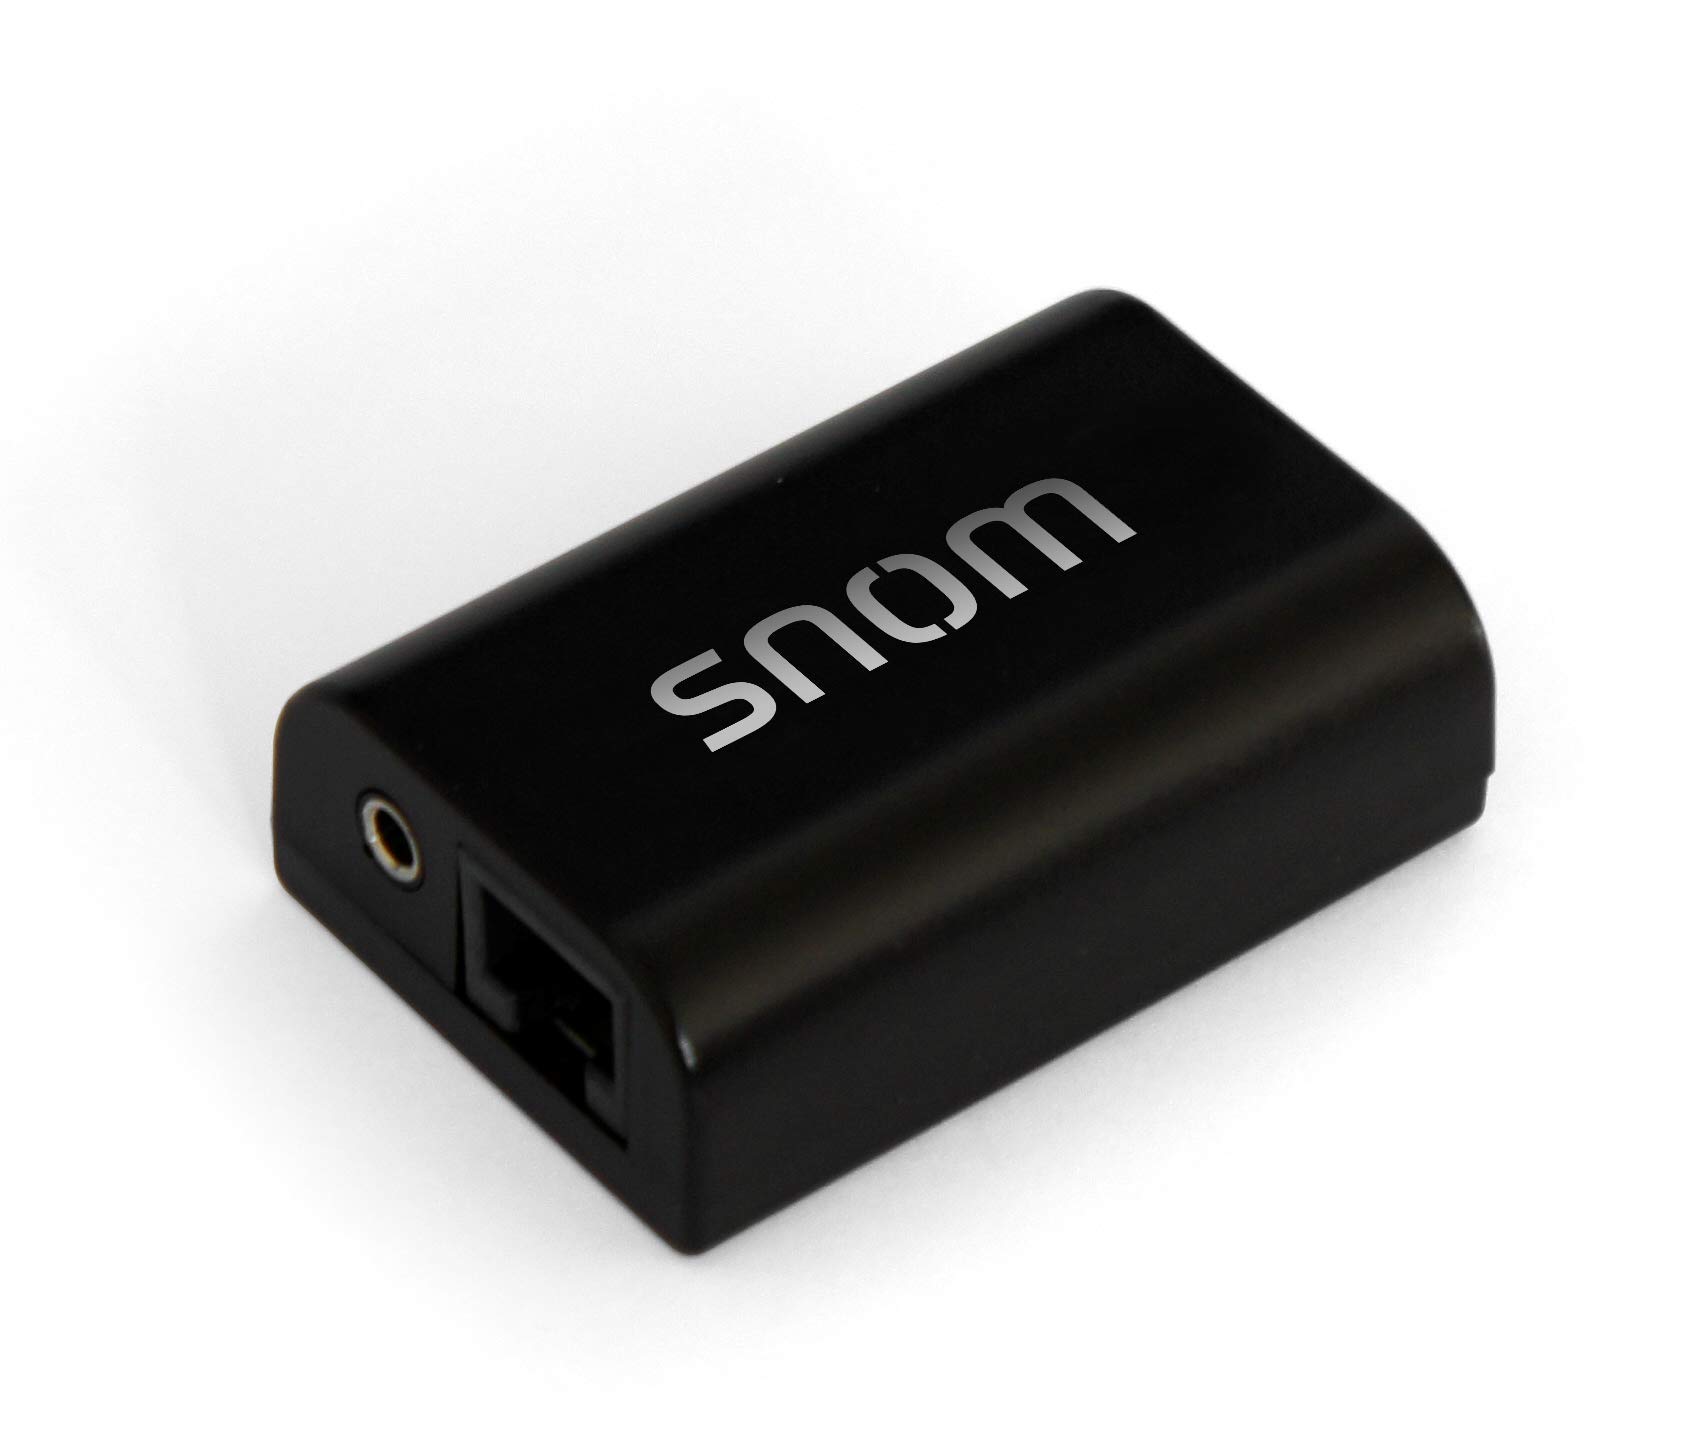 Snom SNOM-2362 SNOM Wireless Headset Adapter, Complete freedom of movement, DHSG Standard, No Additional Power Supply Required SNOM-2362